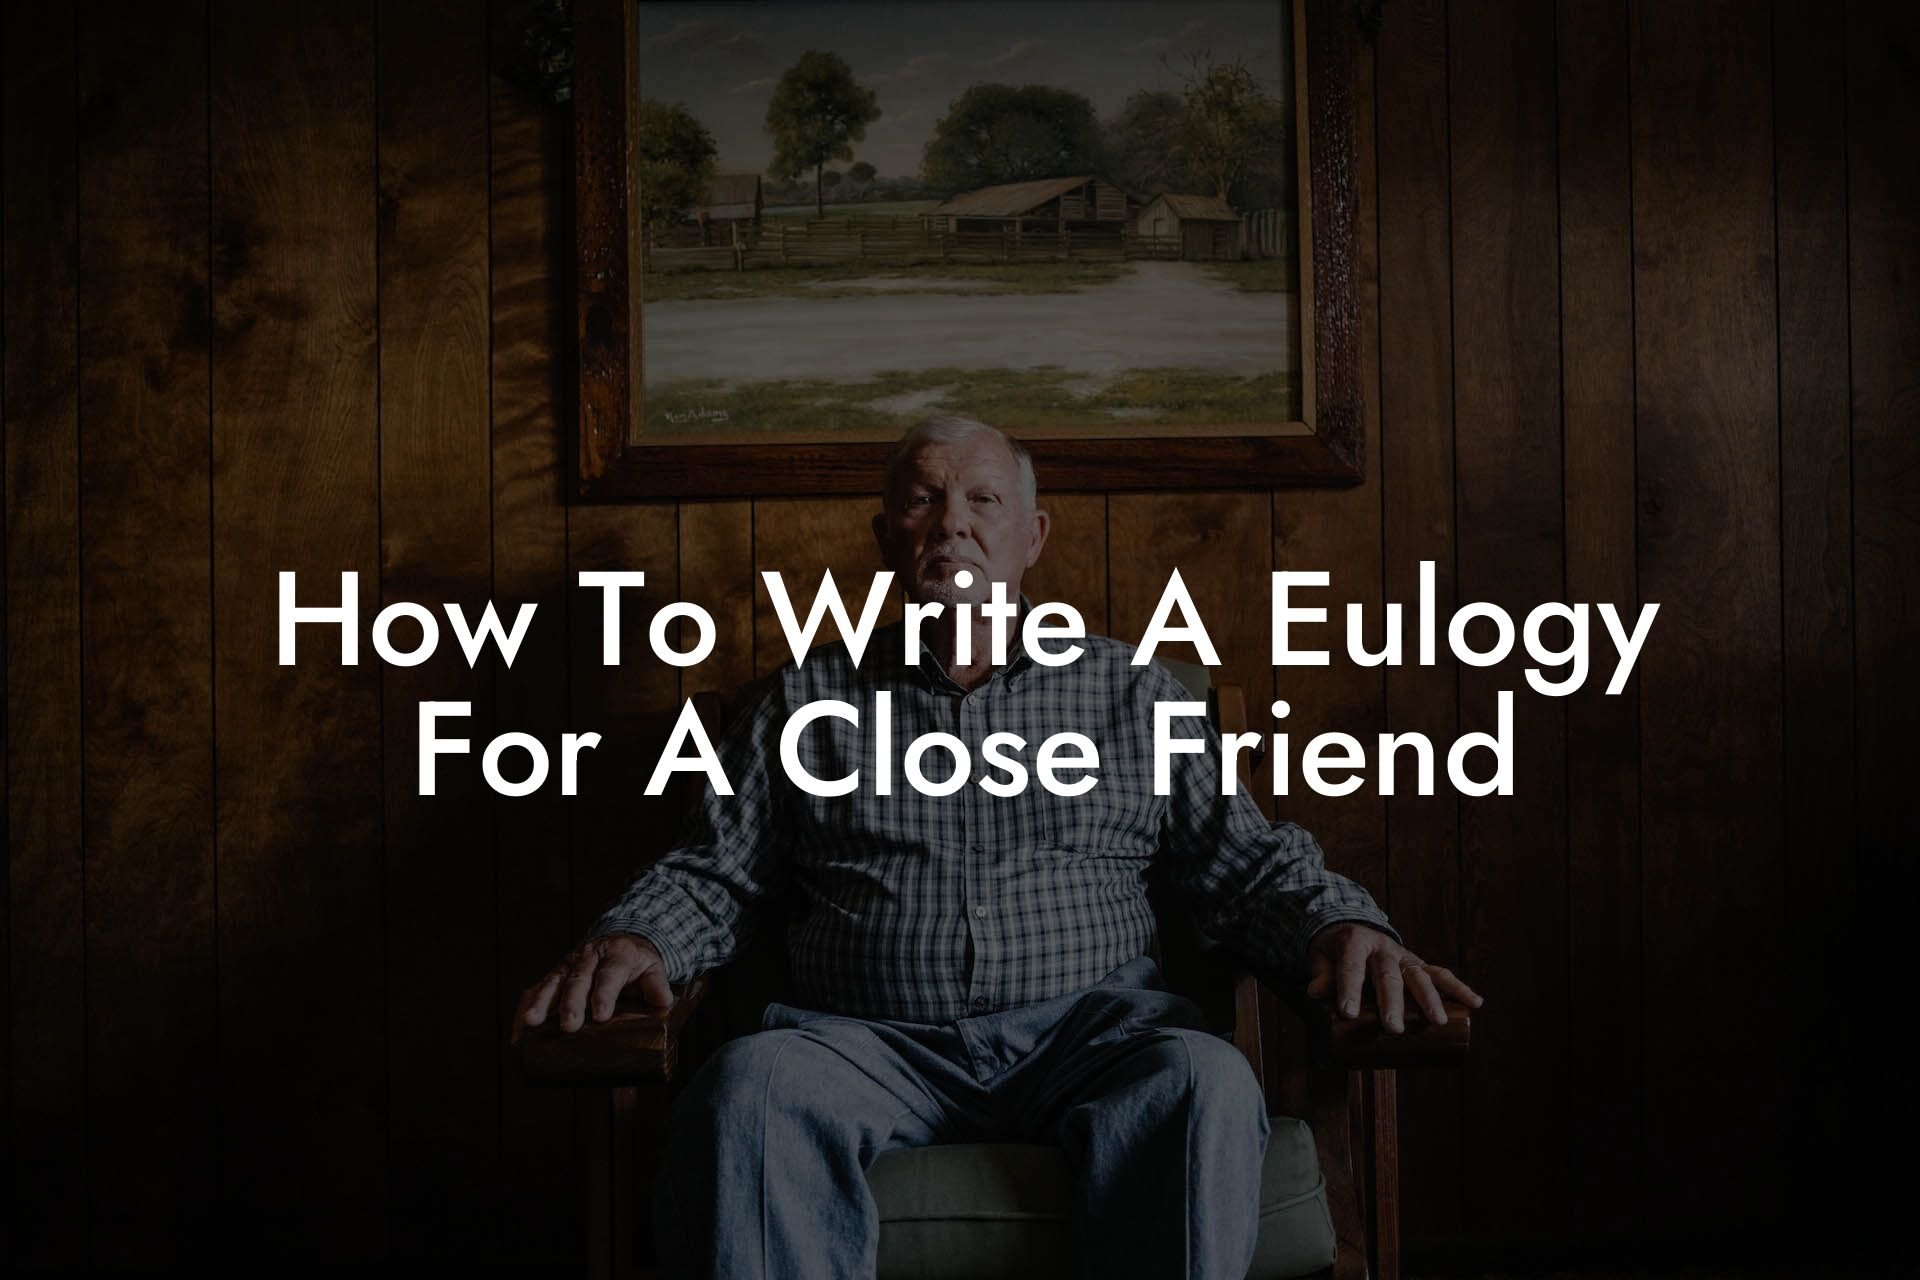 How To Write A Eulogy For A Close Friend